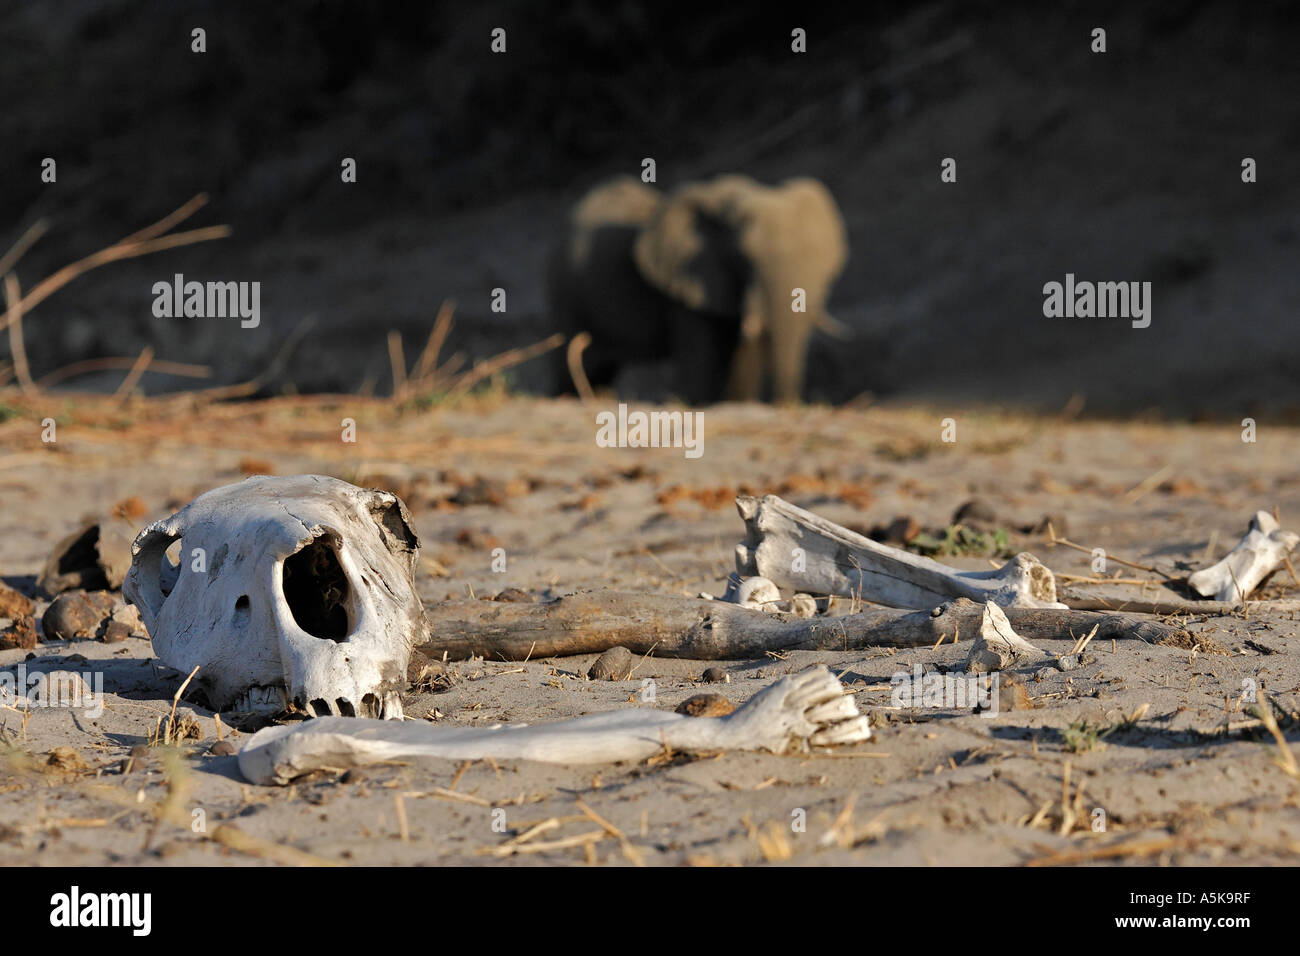 Life and death in the dry river bed of Boteti. Elephant, skull and bones. Makgadikgadi Pan National Park, Botswana, Africa Stock Photo